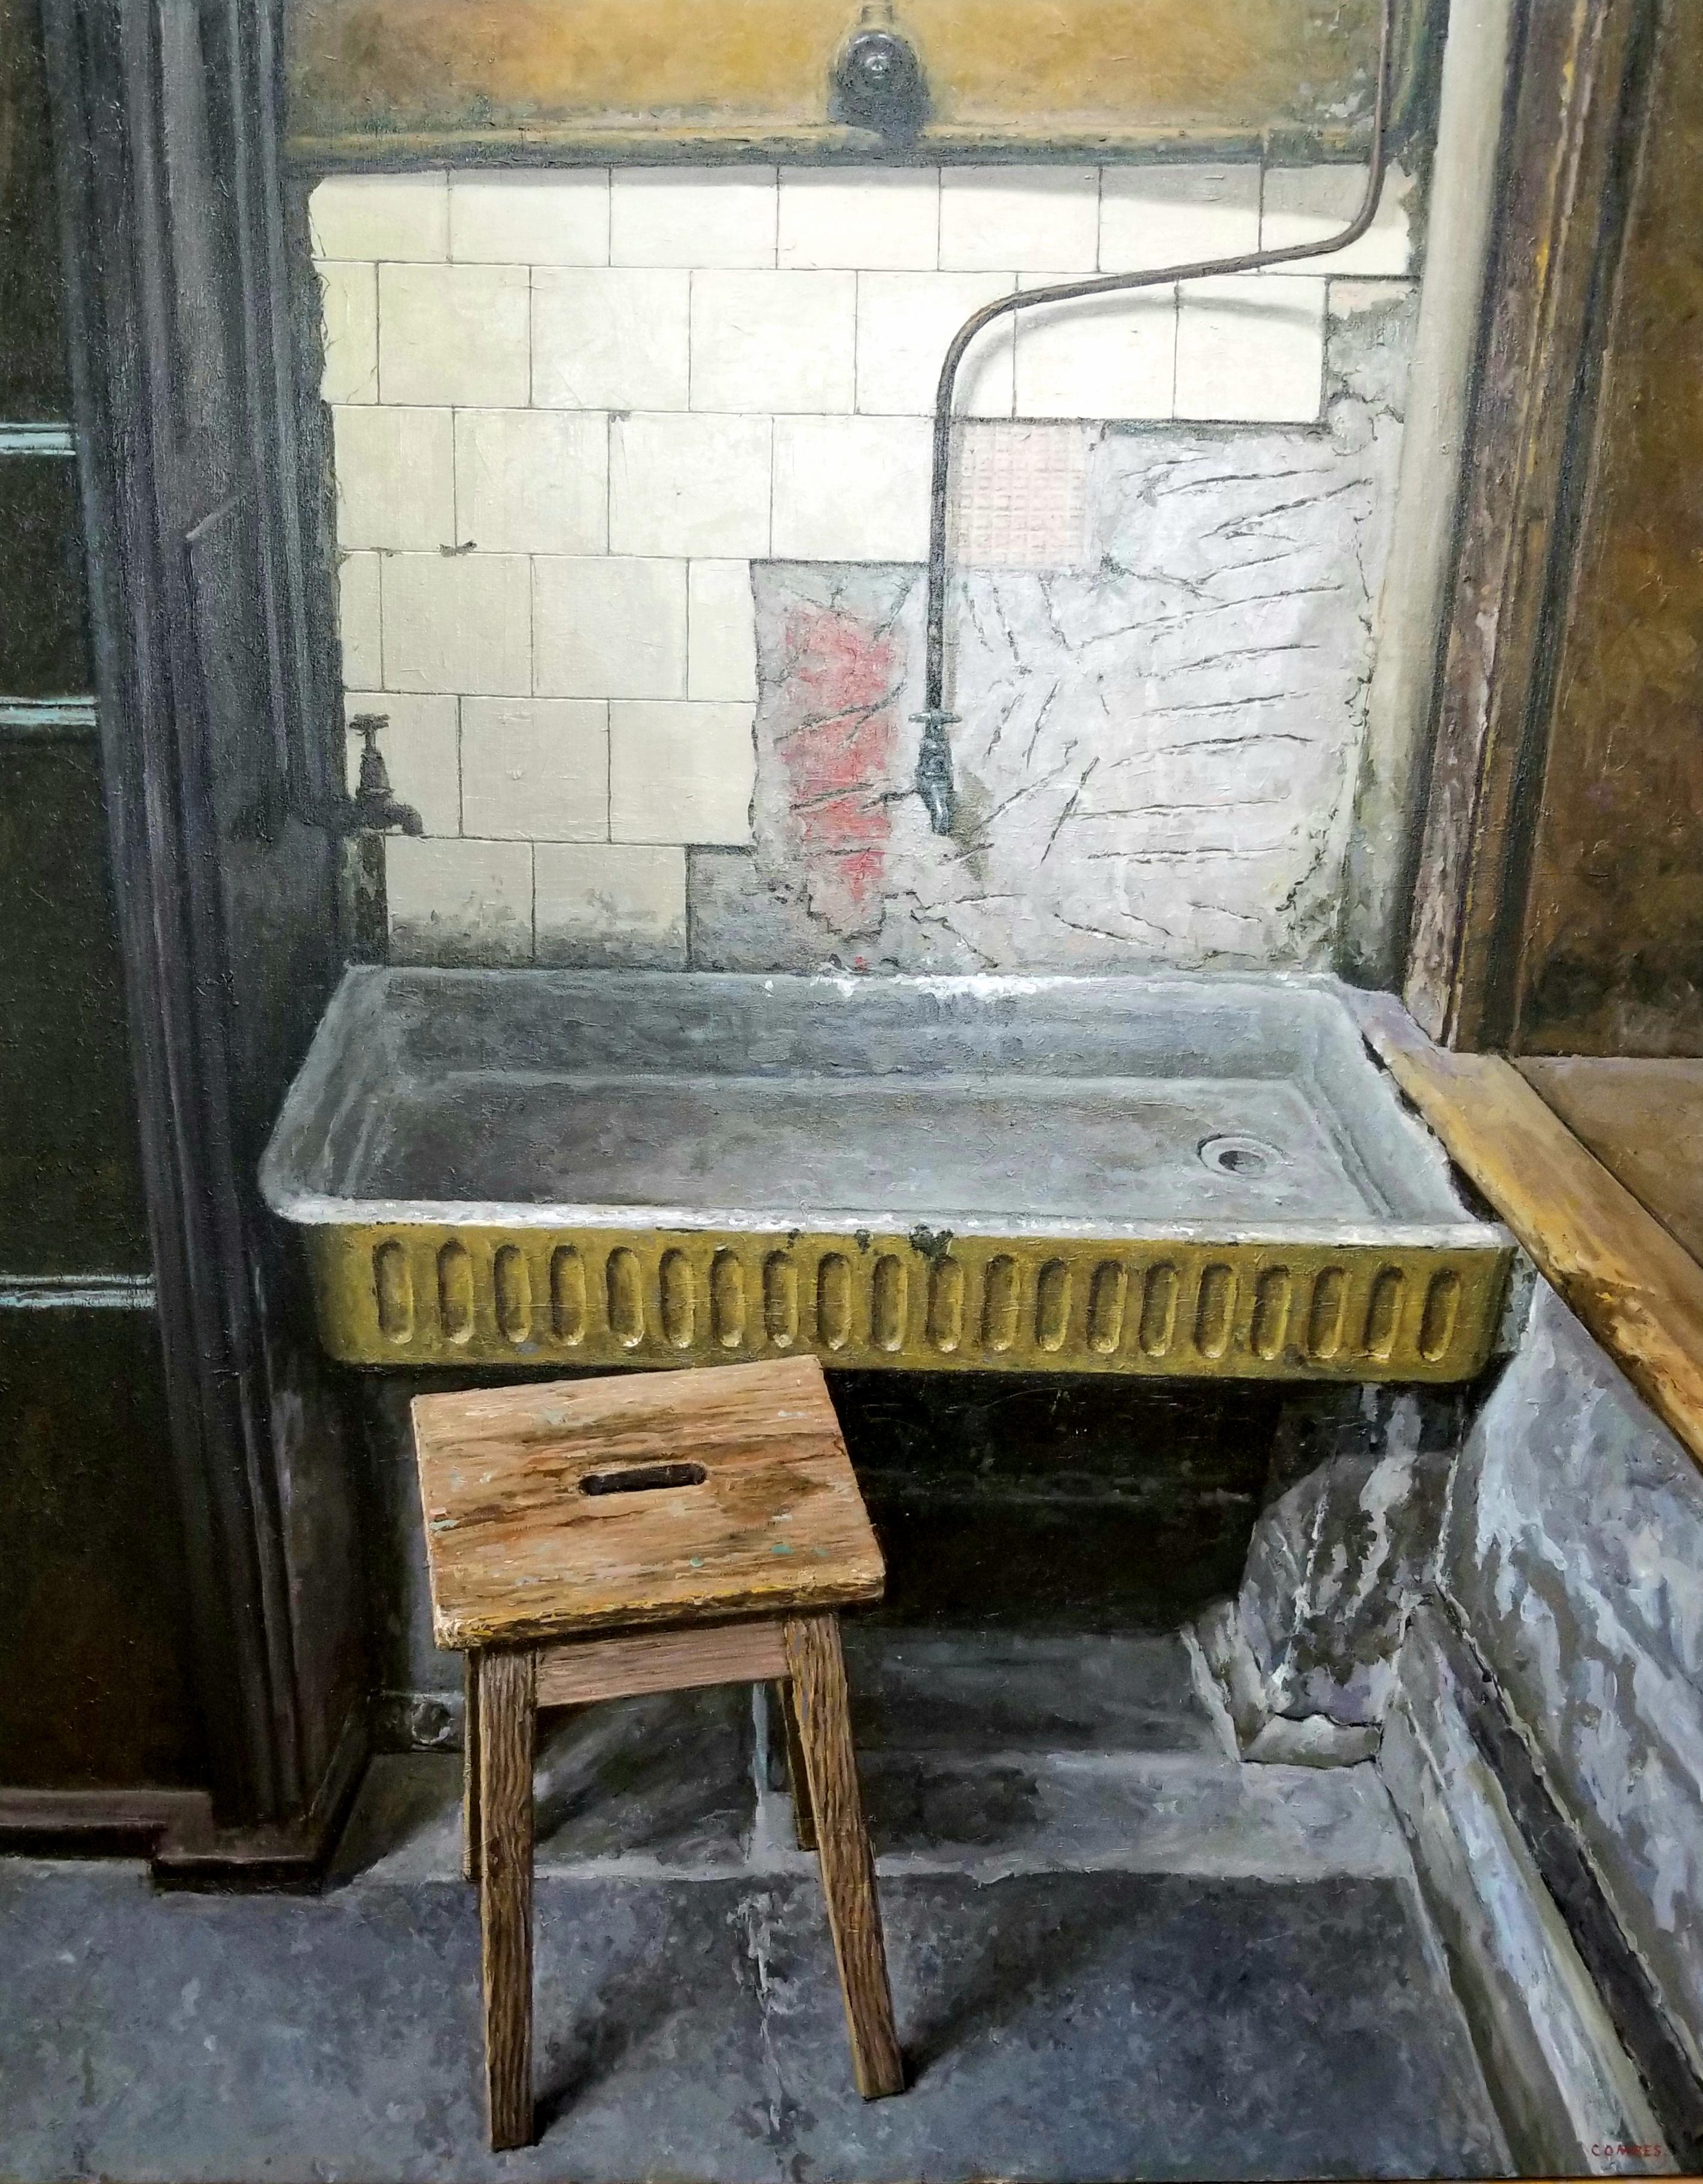 Richard Combes Interior Painting - THE OLD SINK, NYC - Basement Interior / Tiles and Pattern / Realism / Rustic